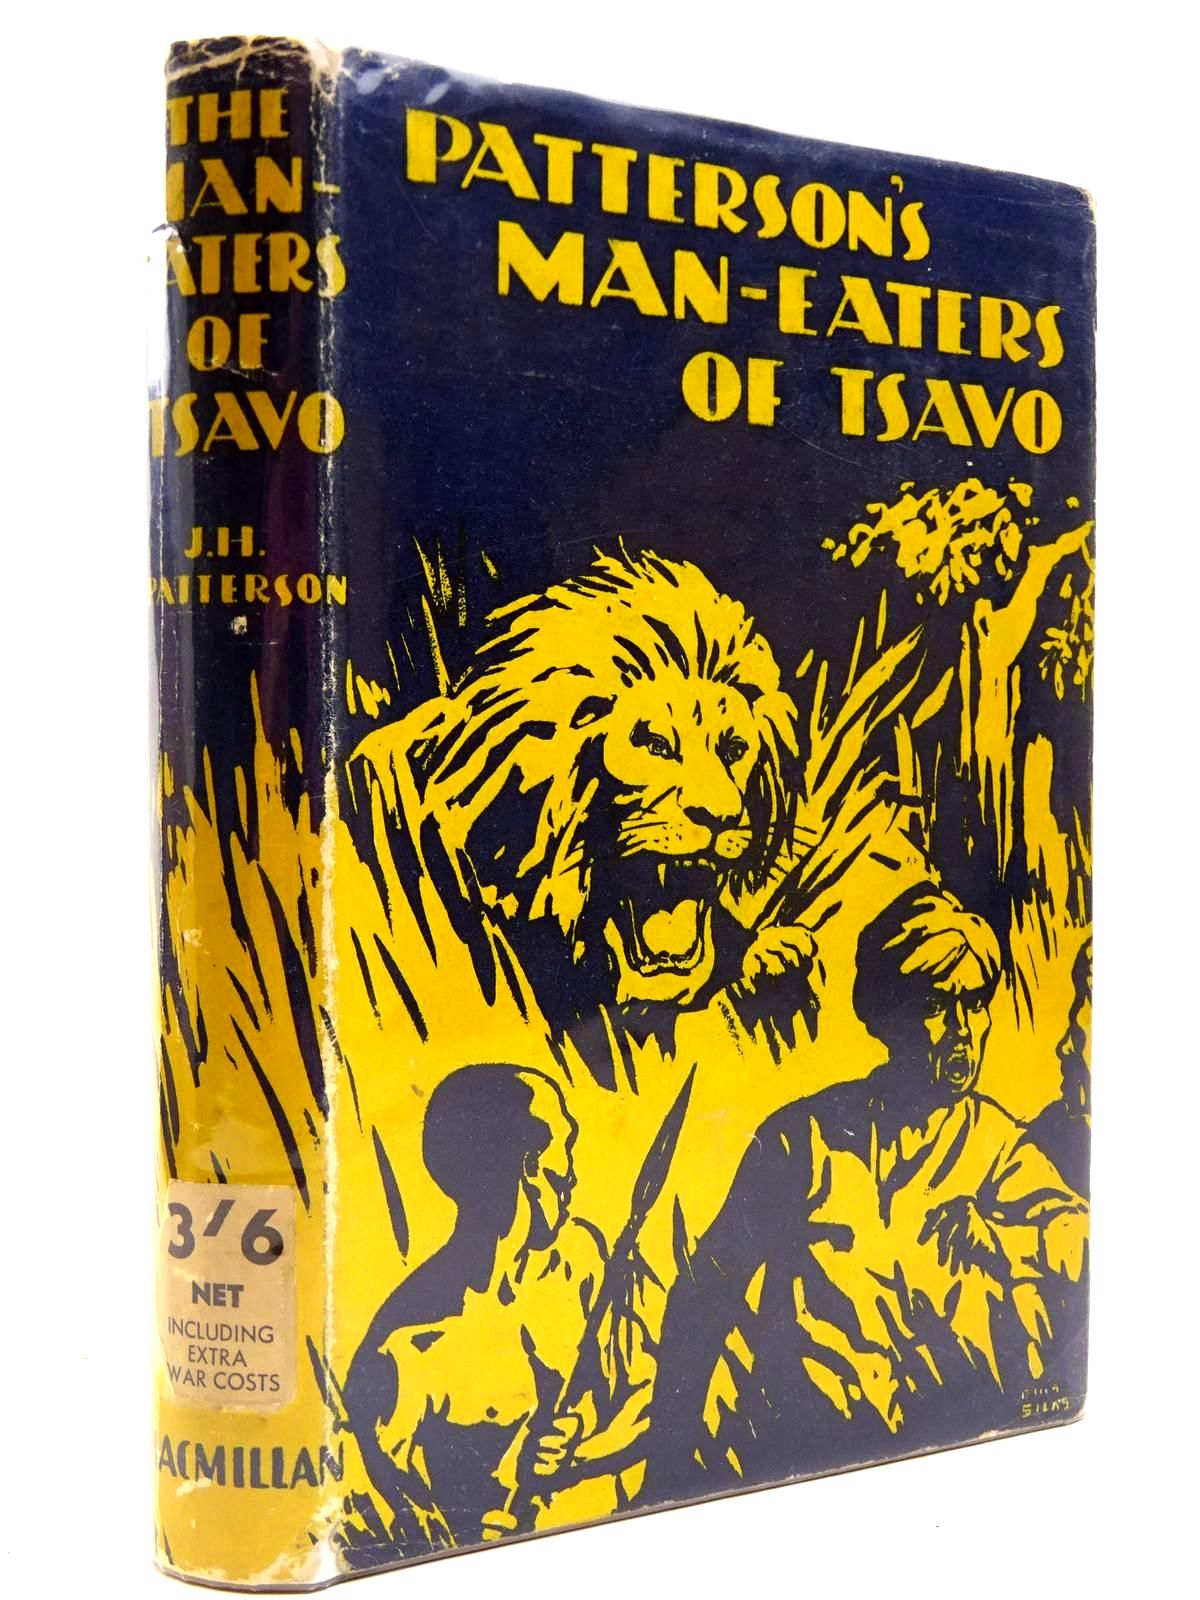 Photo of THE MAN-EATERS OF TSAVO written by Patterson, J.H. published by Macmillan & Co. Ltd. (STOCK CODE: 2131020) for sale by Stella & Rose's Books